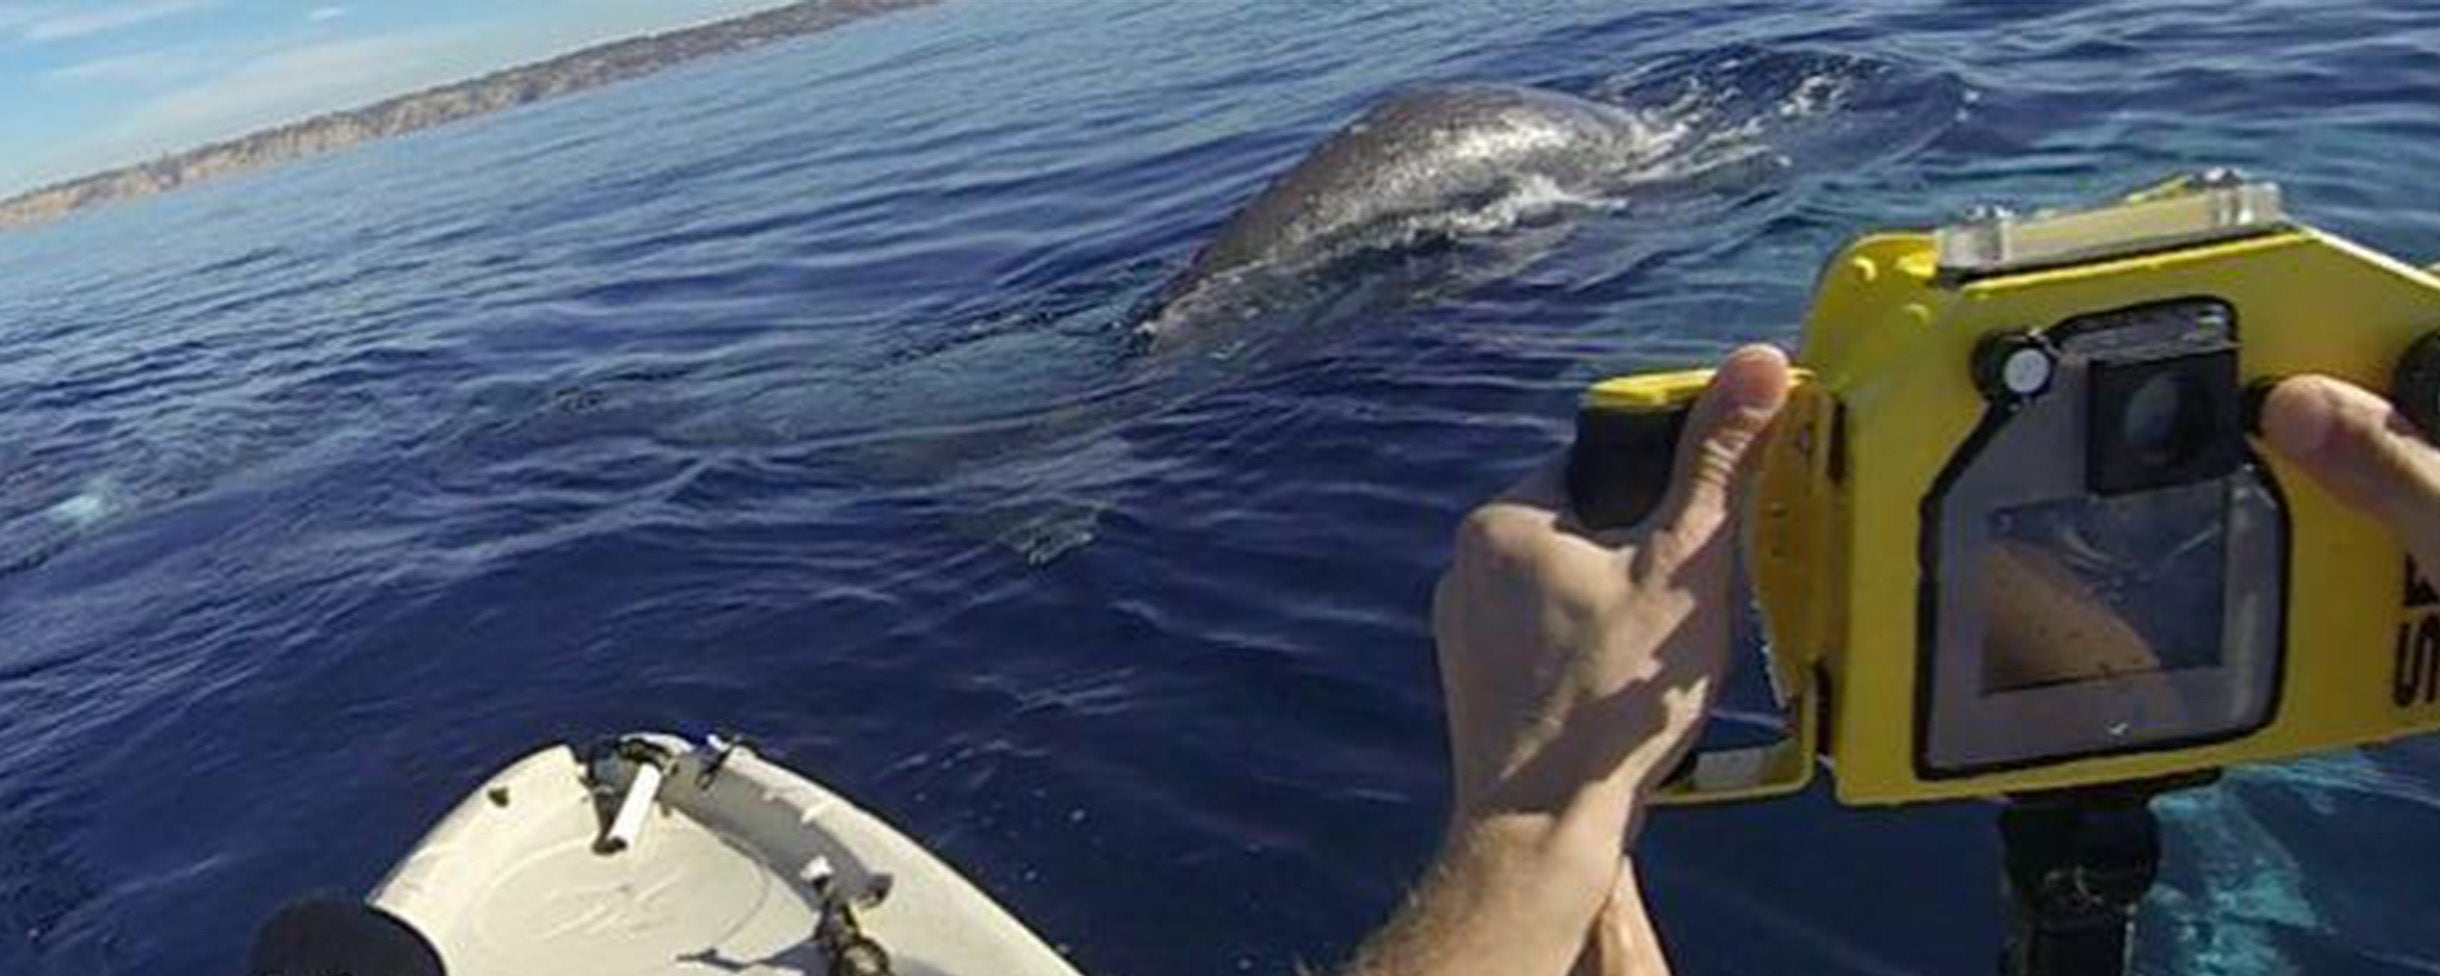 A baby whale comes up to kayakers on an Everyday California Whale Watching Tour in La Jolla, California.